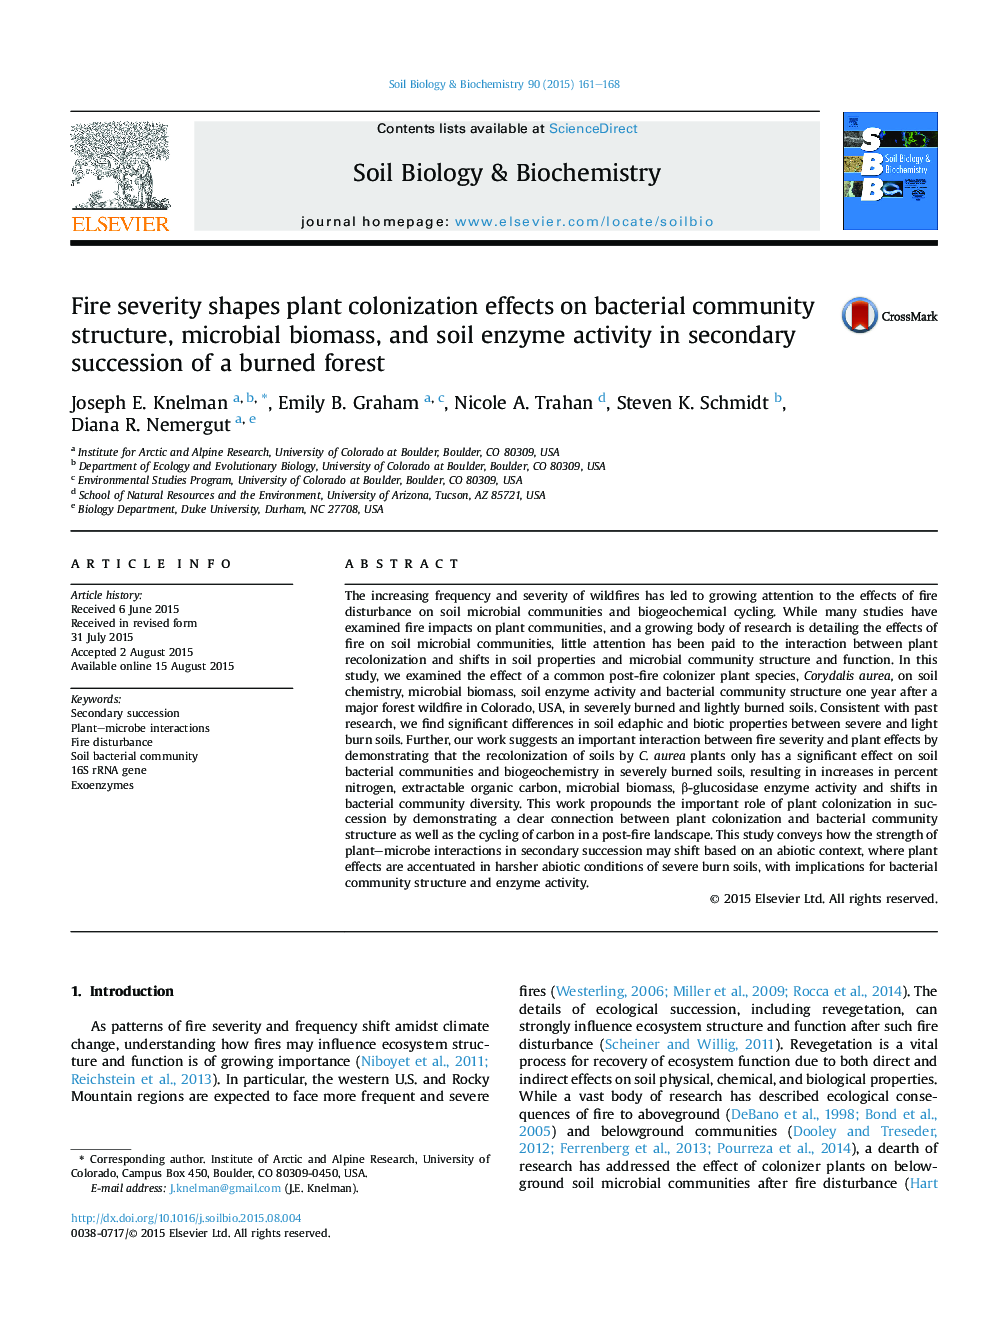 Fire severity shapes plant colonization effects on bacterial community structure, microbial biomass, and soil enzyme activity in secondary succession of a burned forest